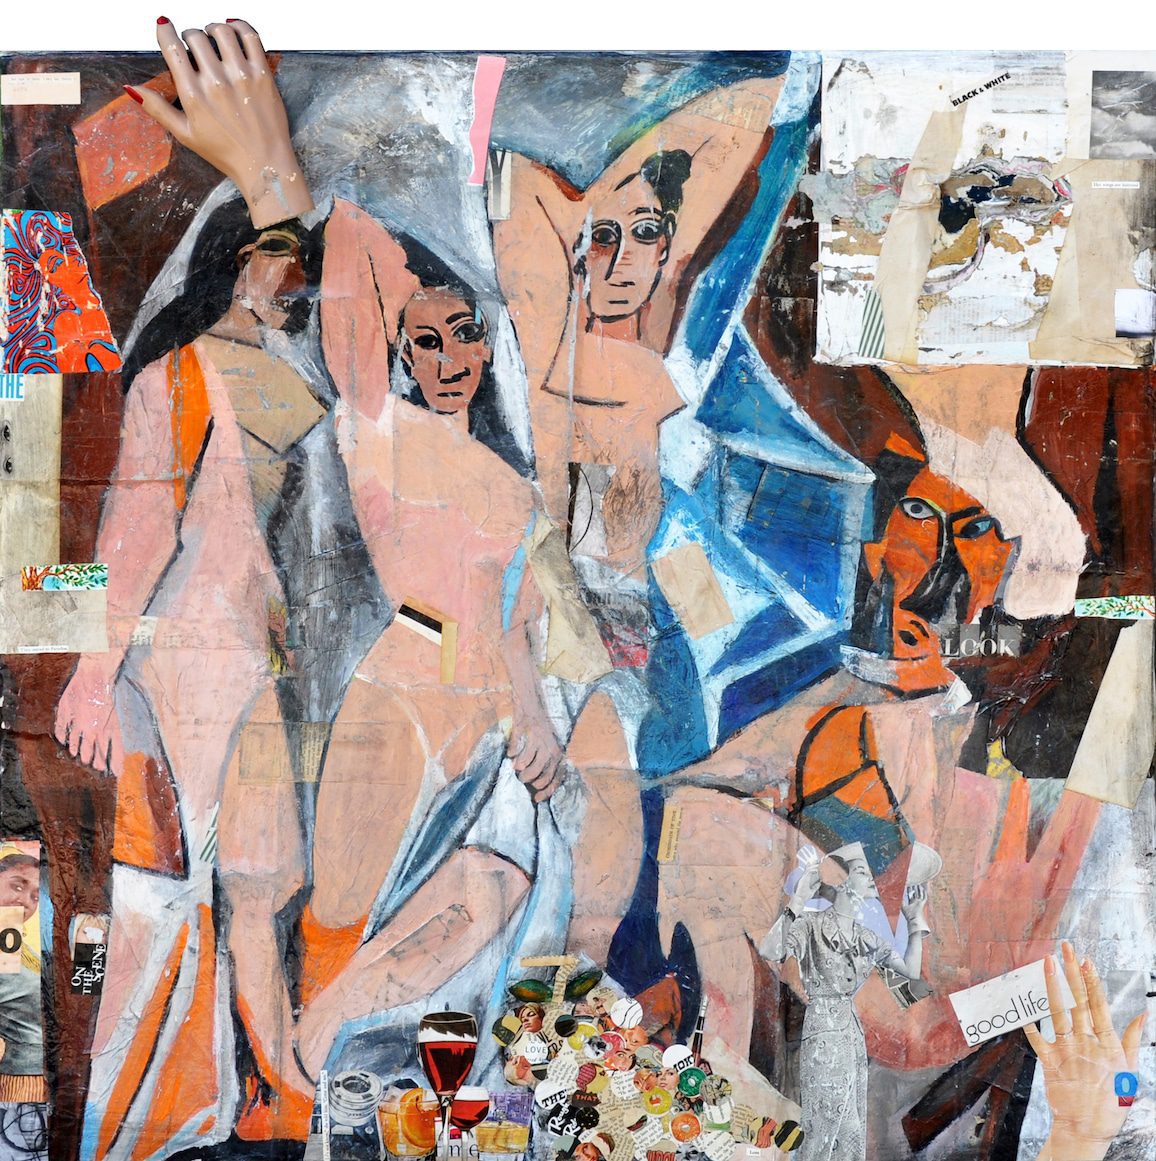 Greg Miller. Les Demoiselles. Acrylic Paint, Spray Paint, Collage Paper on Panel. 36 x 36 inches